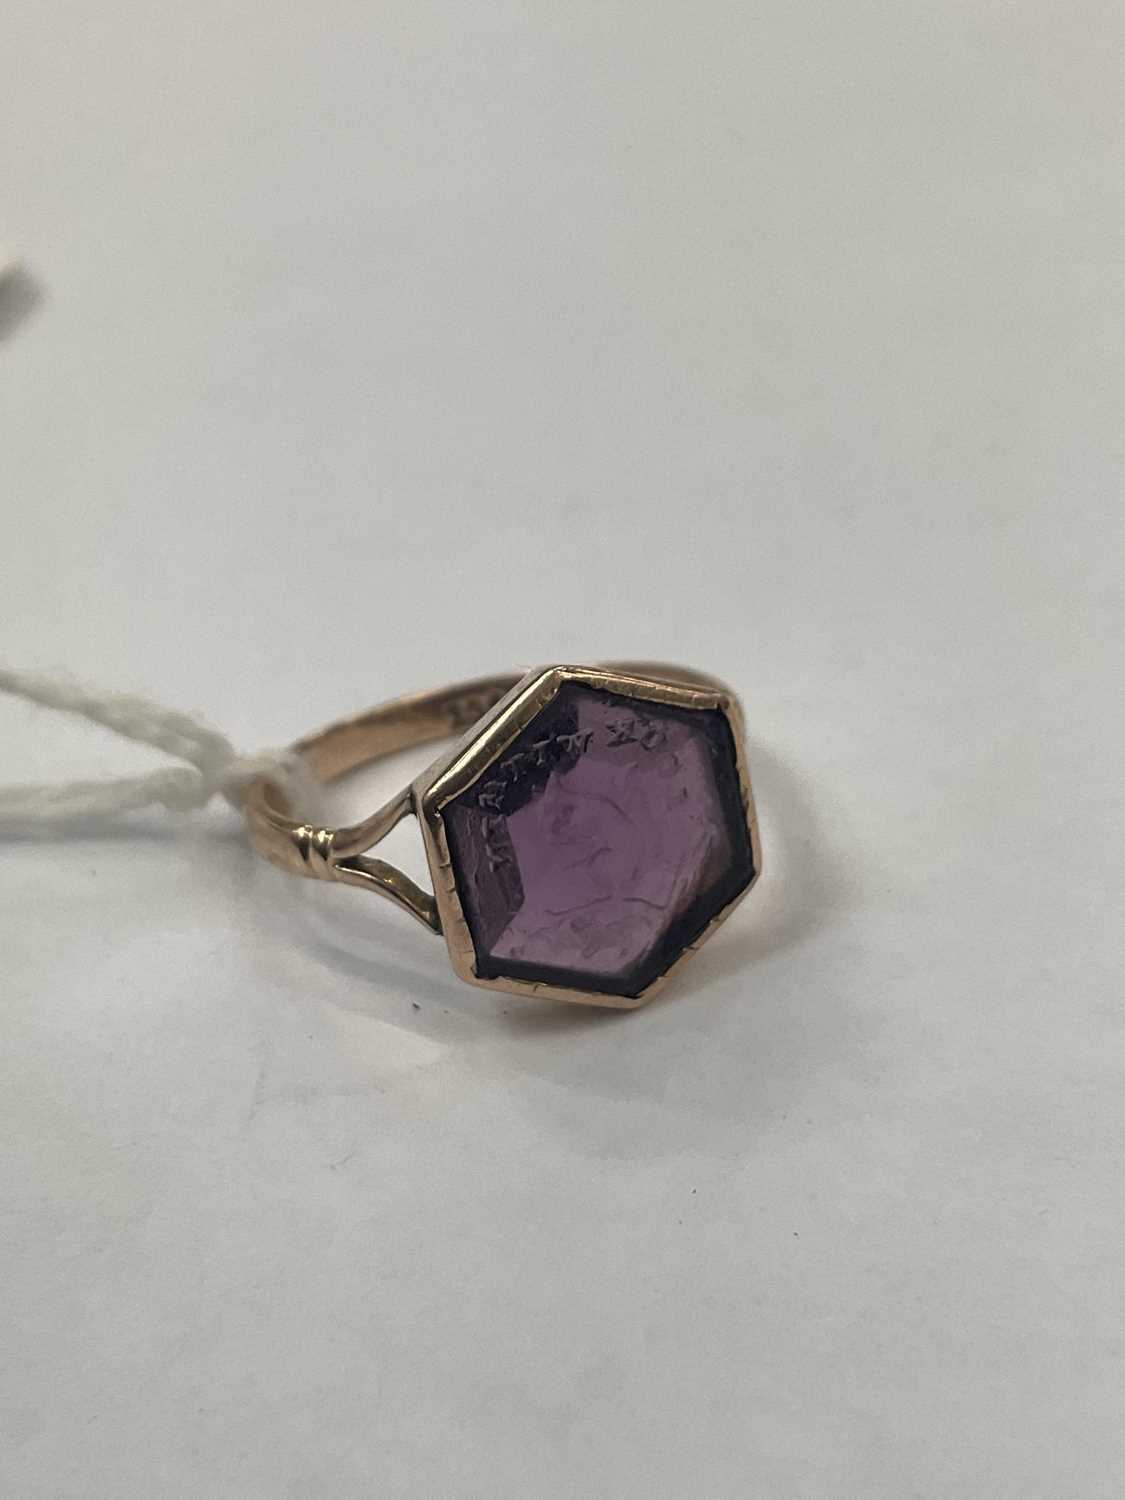 Victorian rose gold amethyst glass intaglio ring - Image 5 of 6